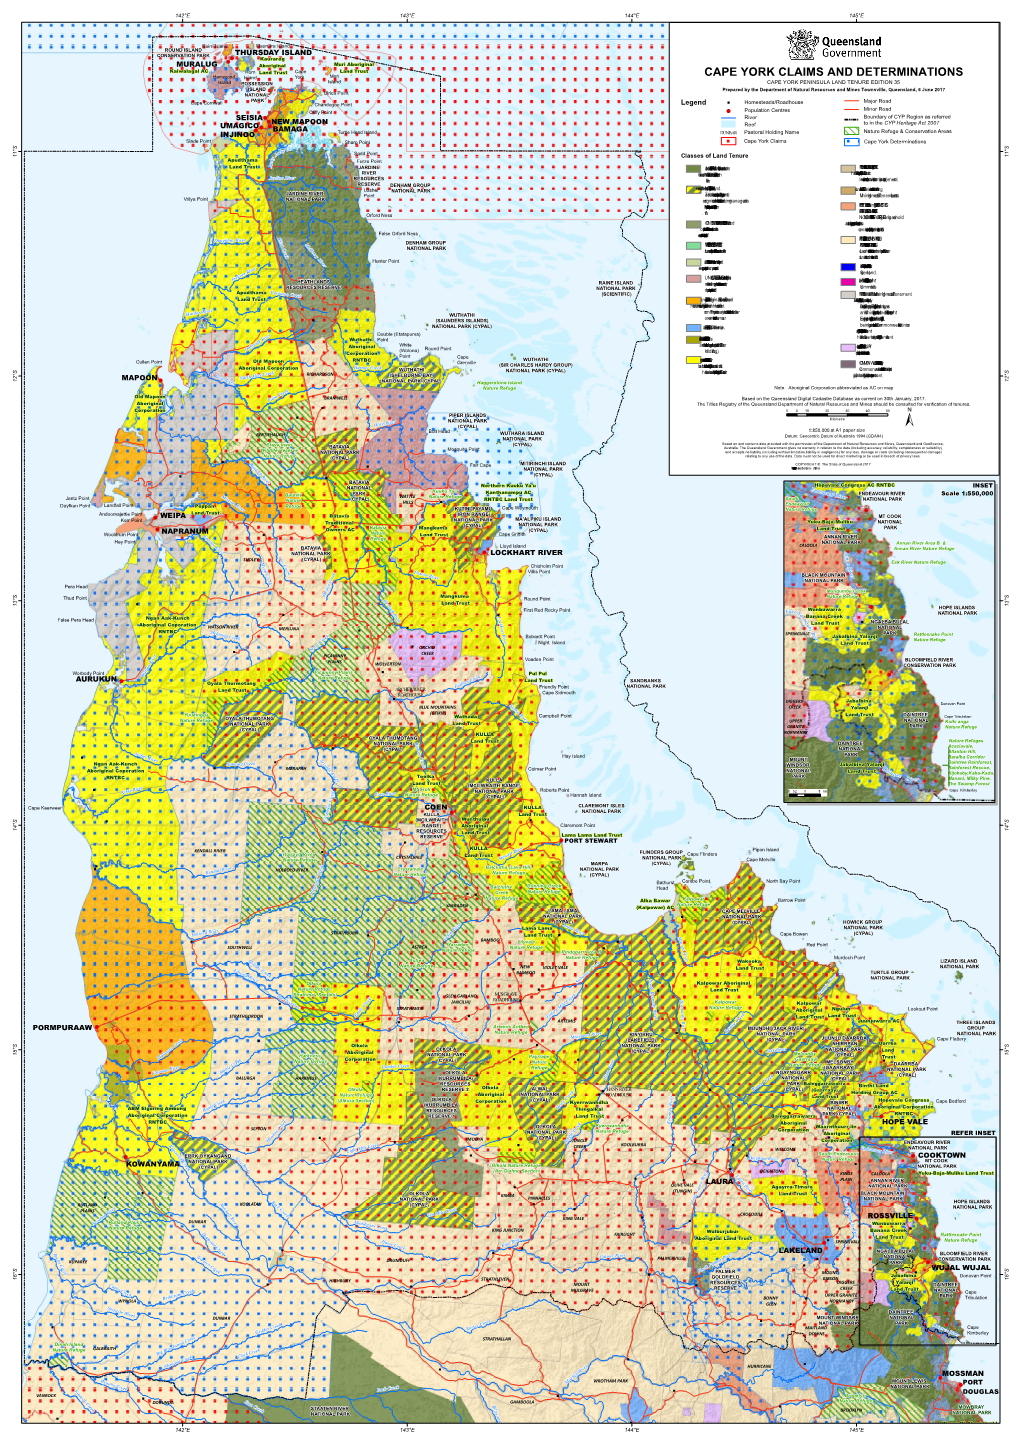 Cape York Claims and Determinations